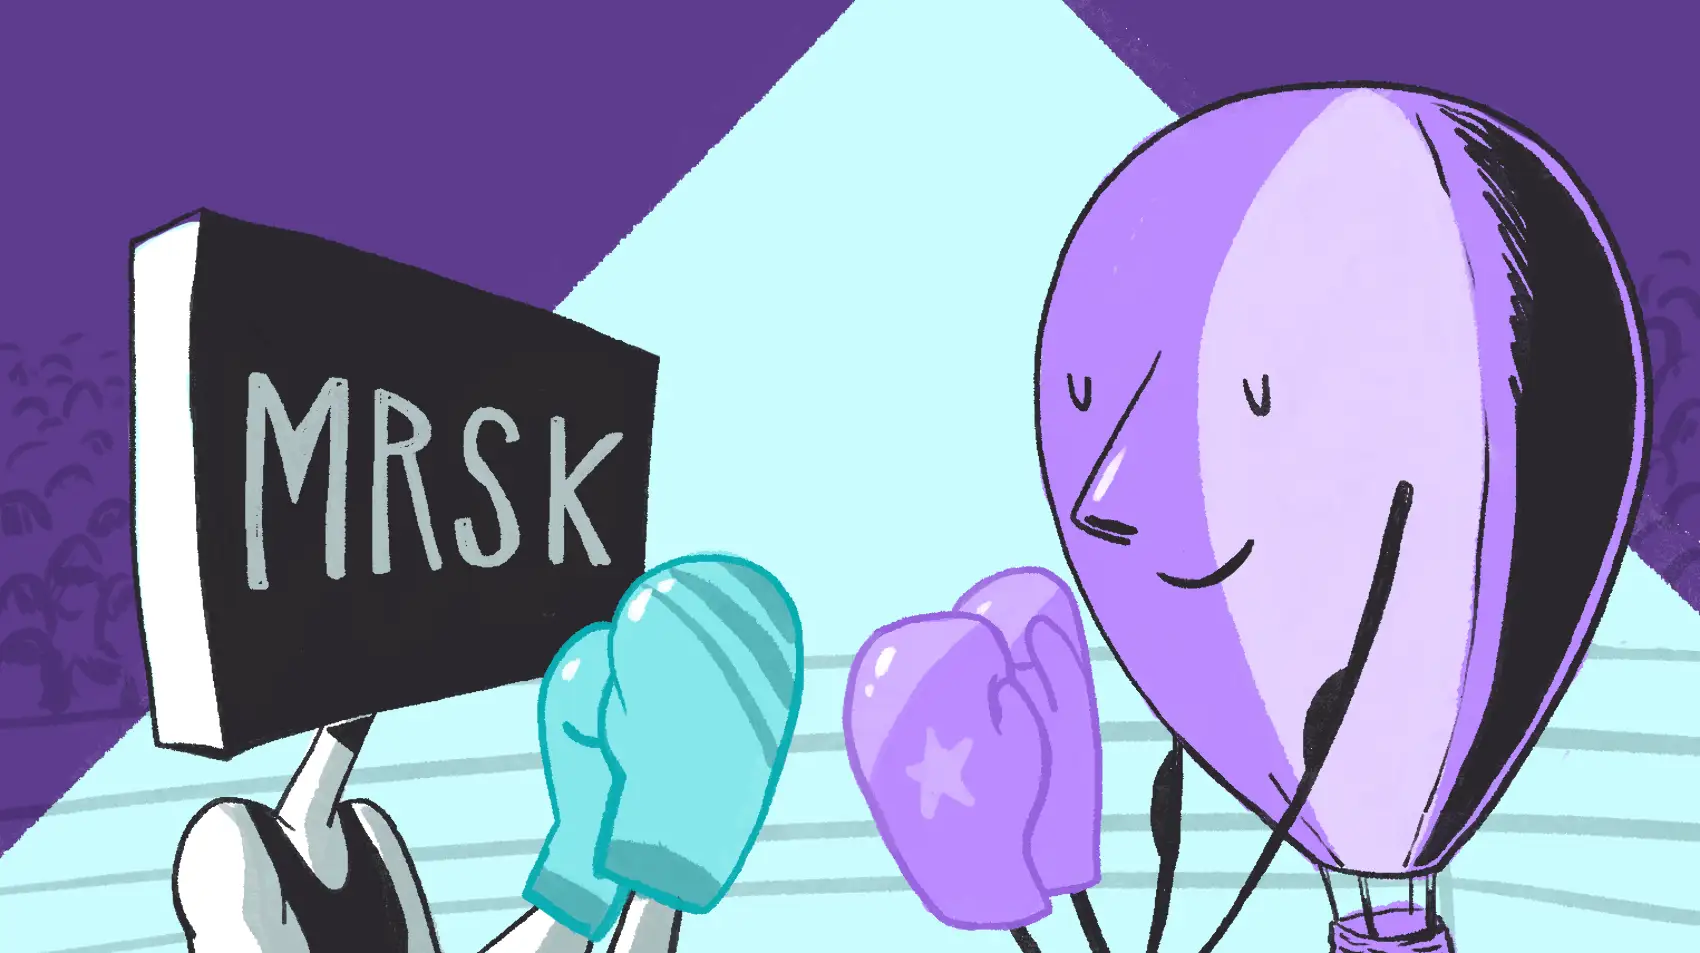 MSRK logo vs Fly's balloon with boxing gloves